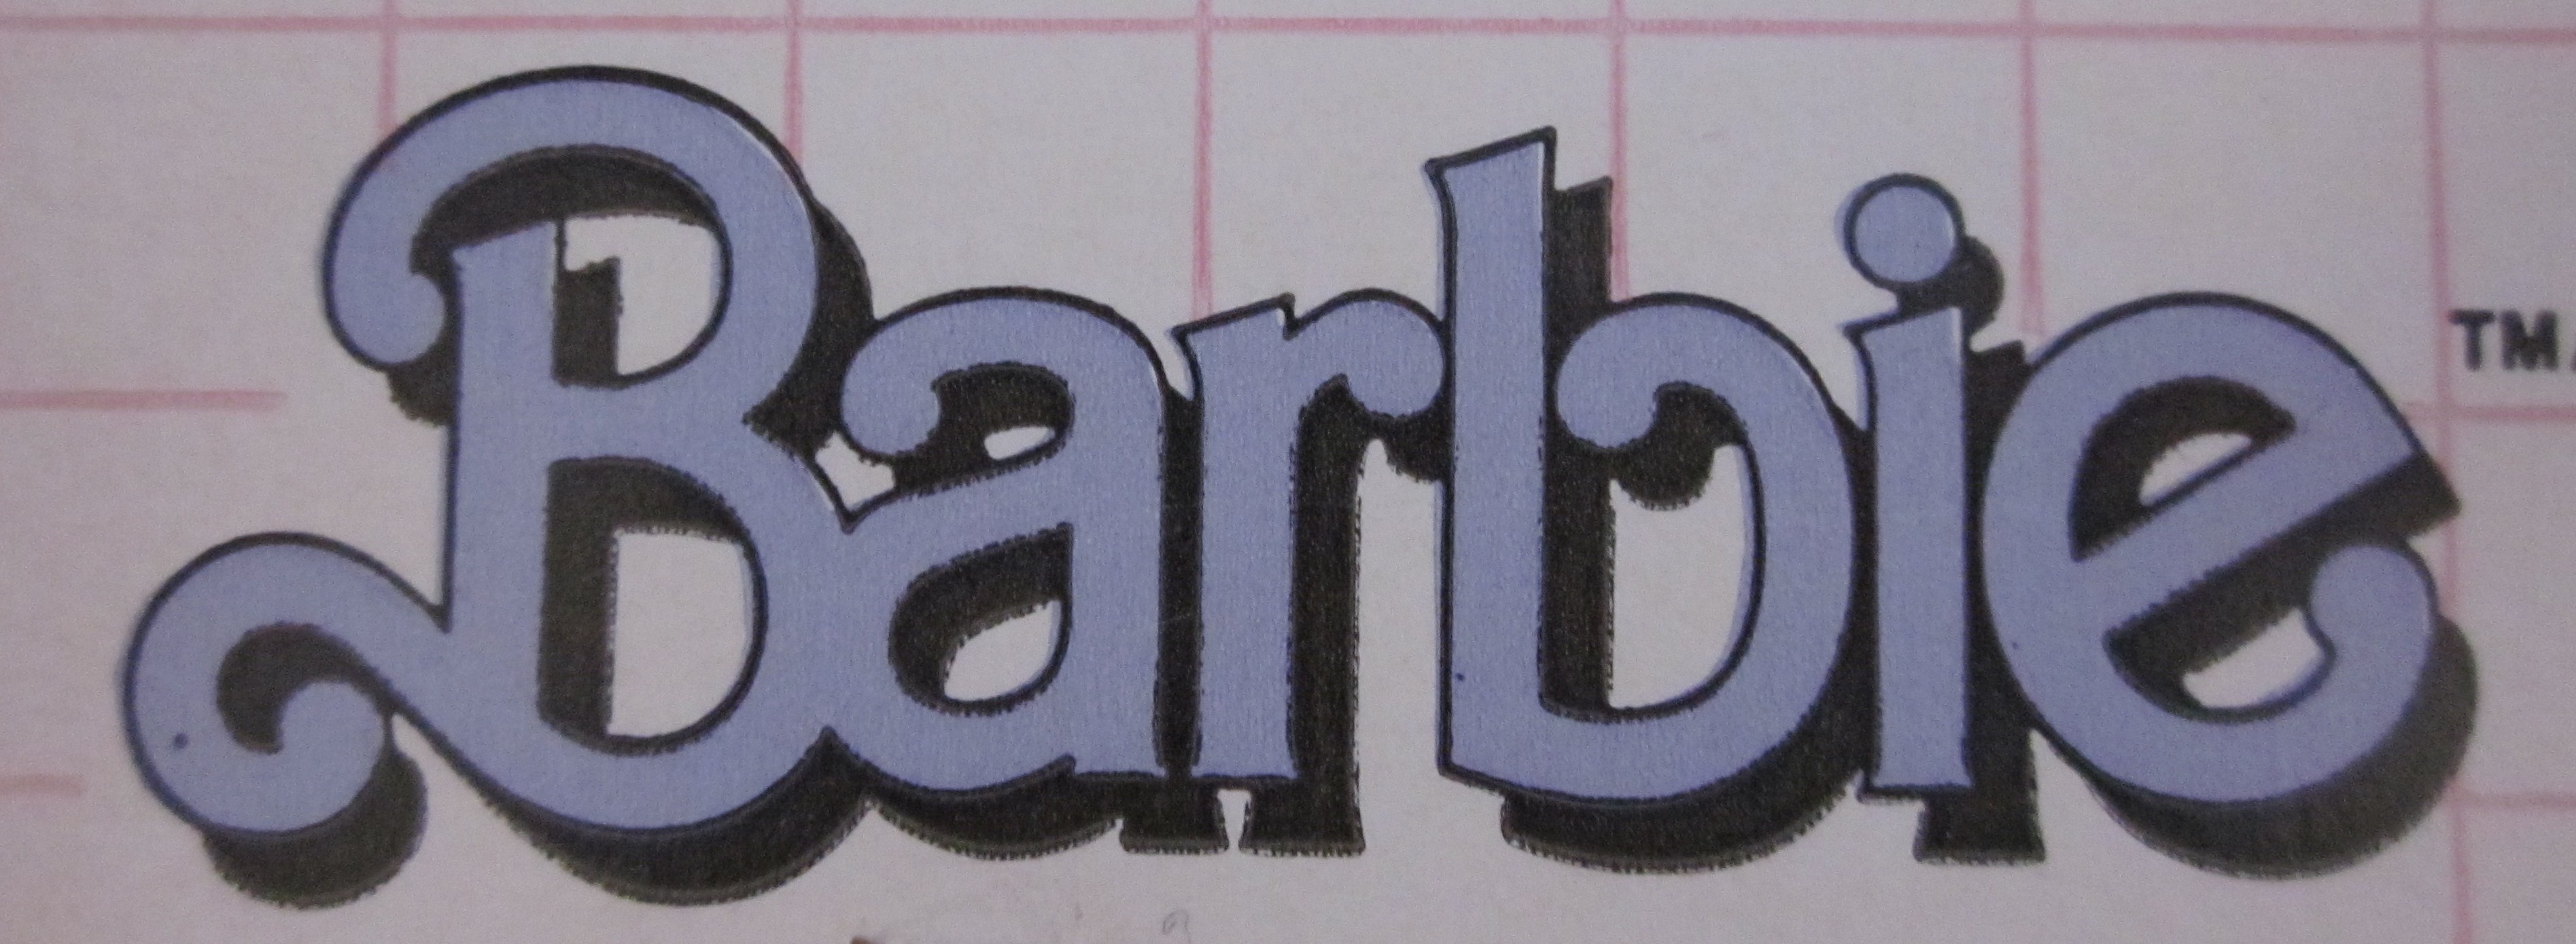 What font is closest to the Barbie logo?